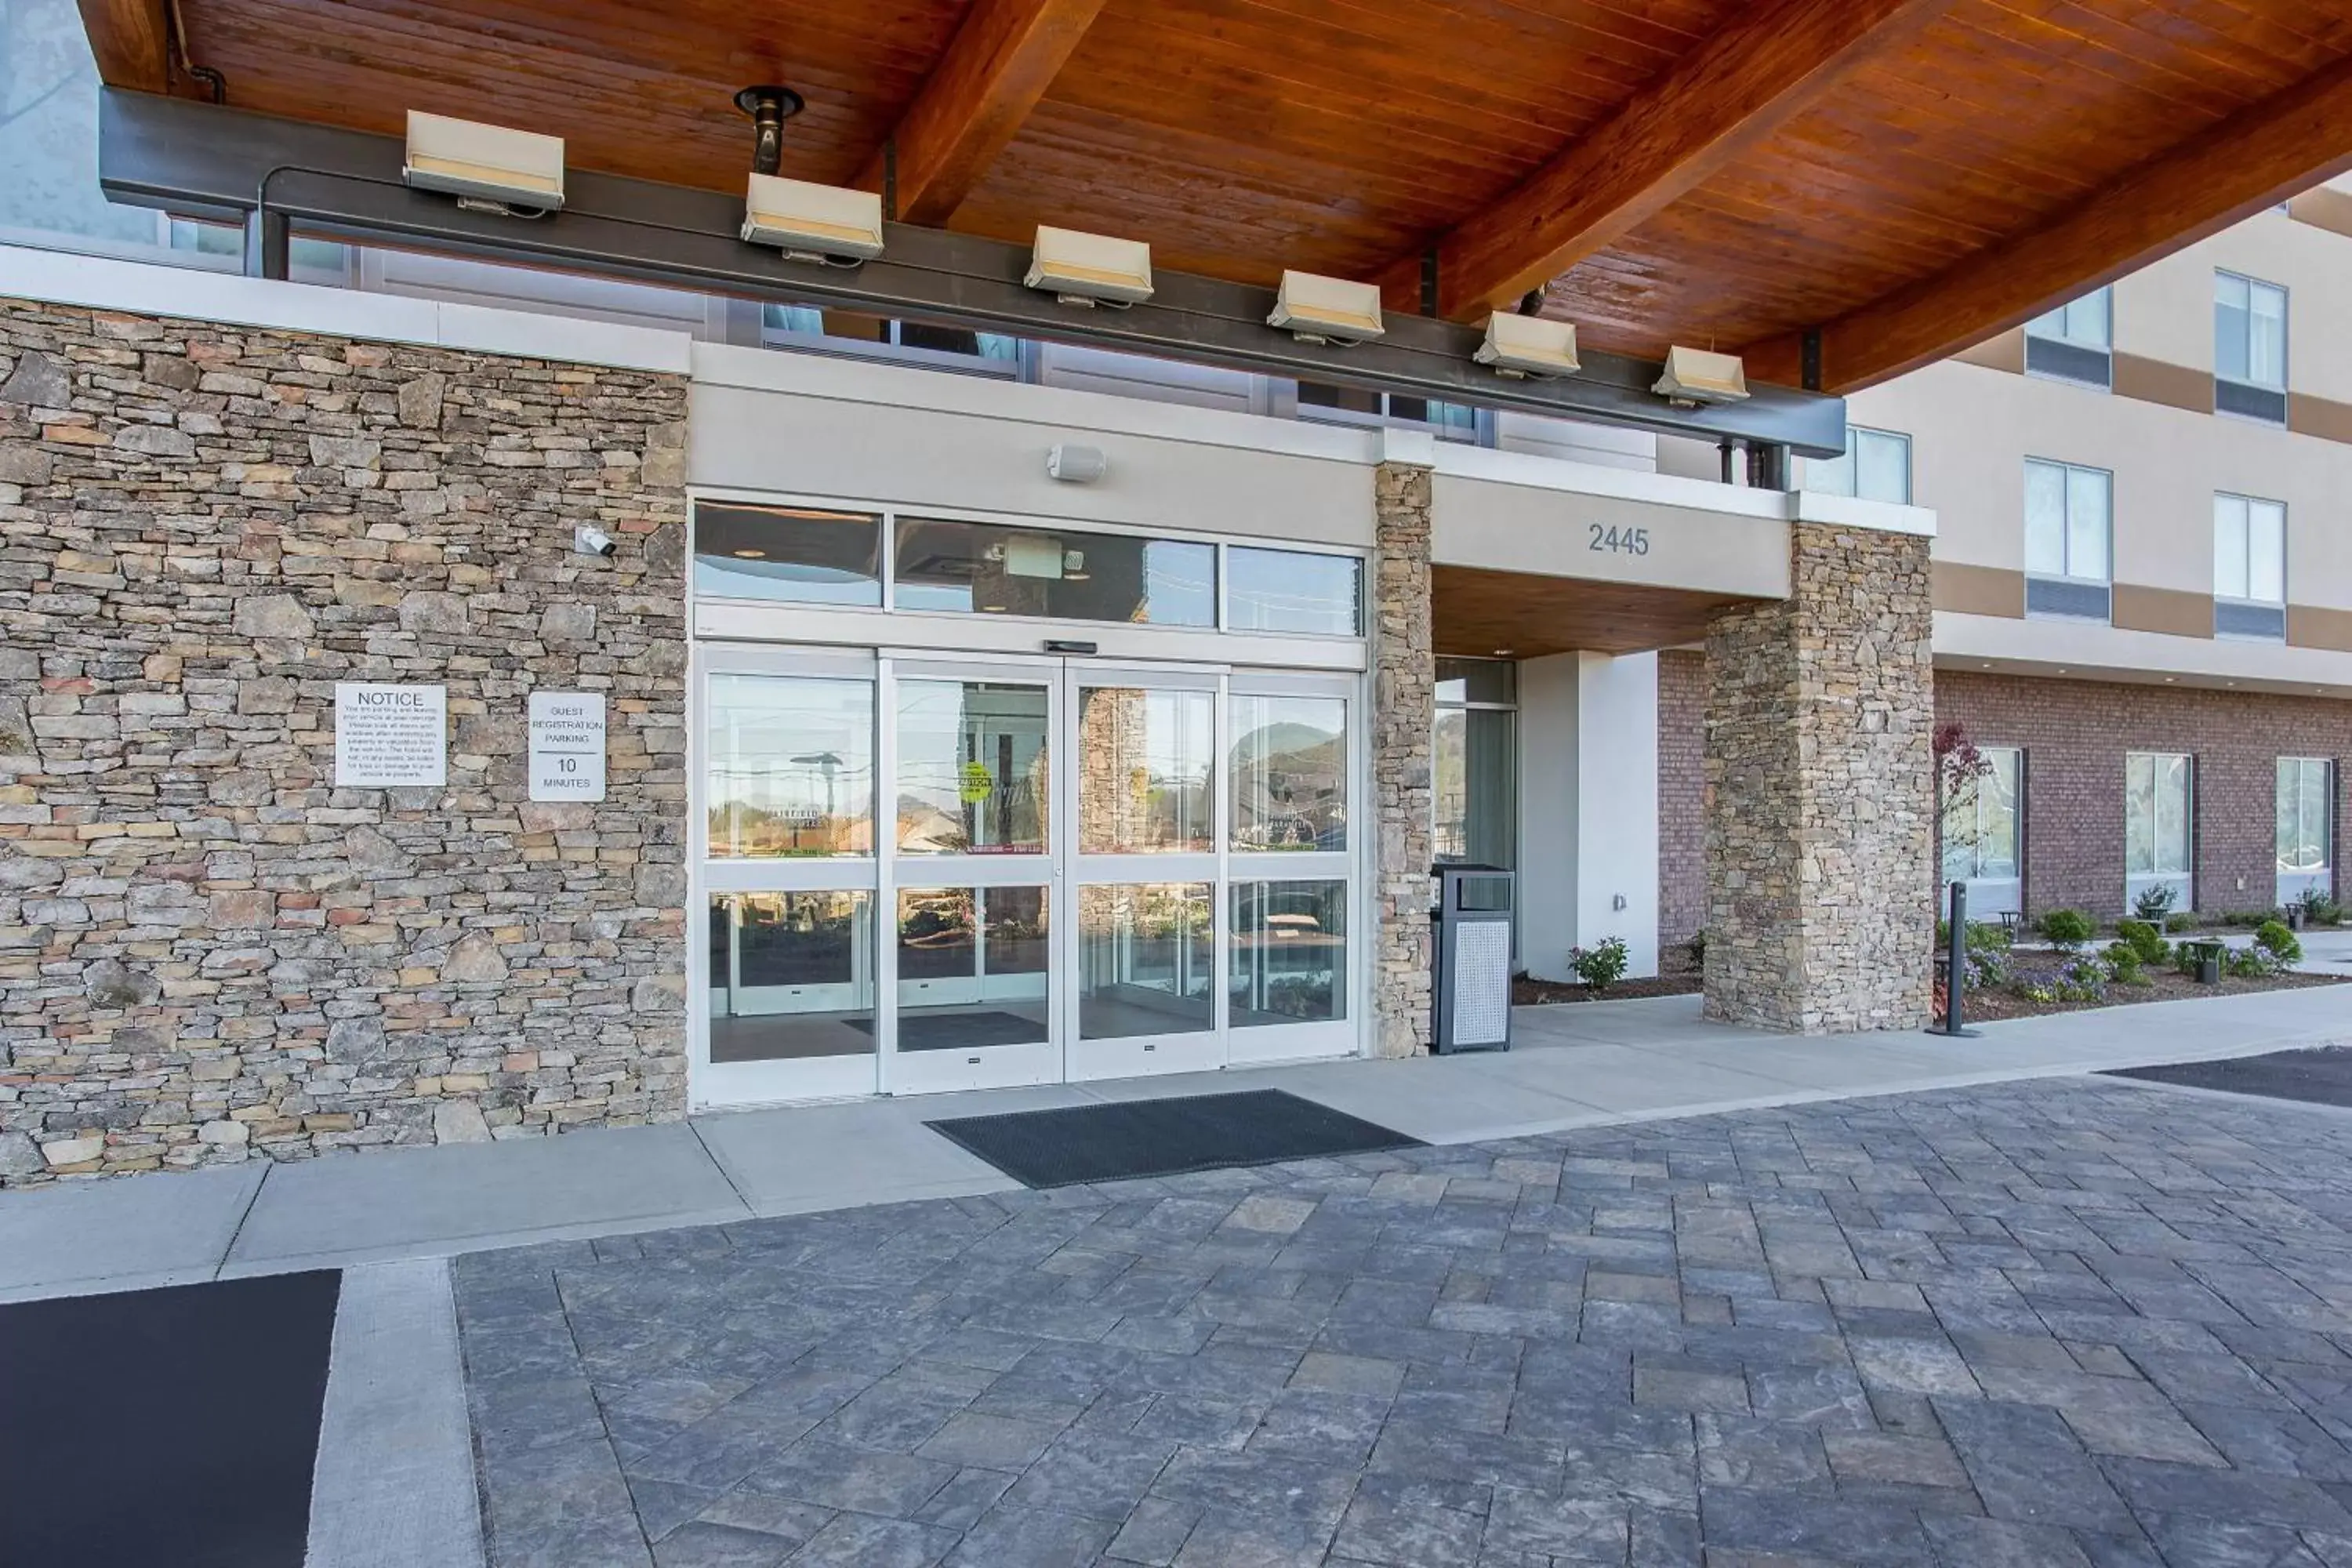 Property building in Fairfield Inn & Suites by Marriott Pigeon Forge